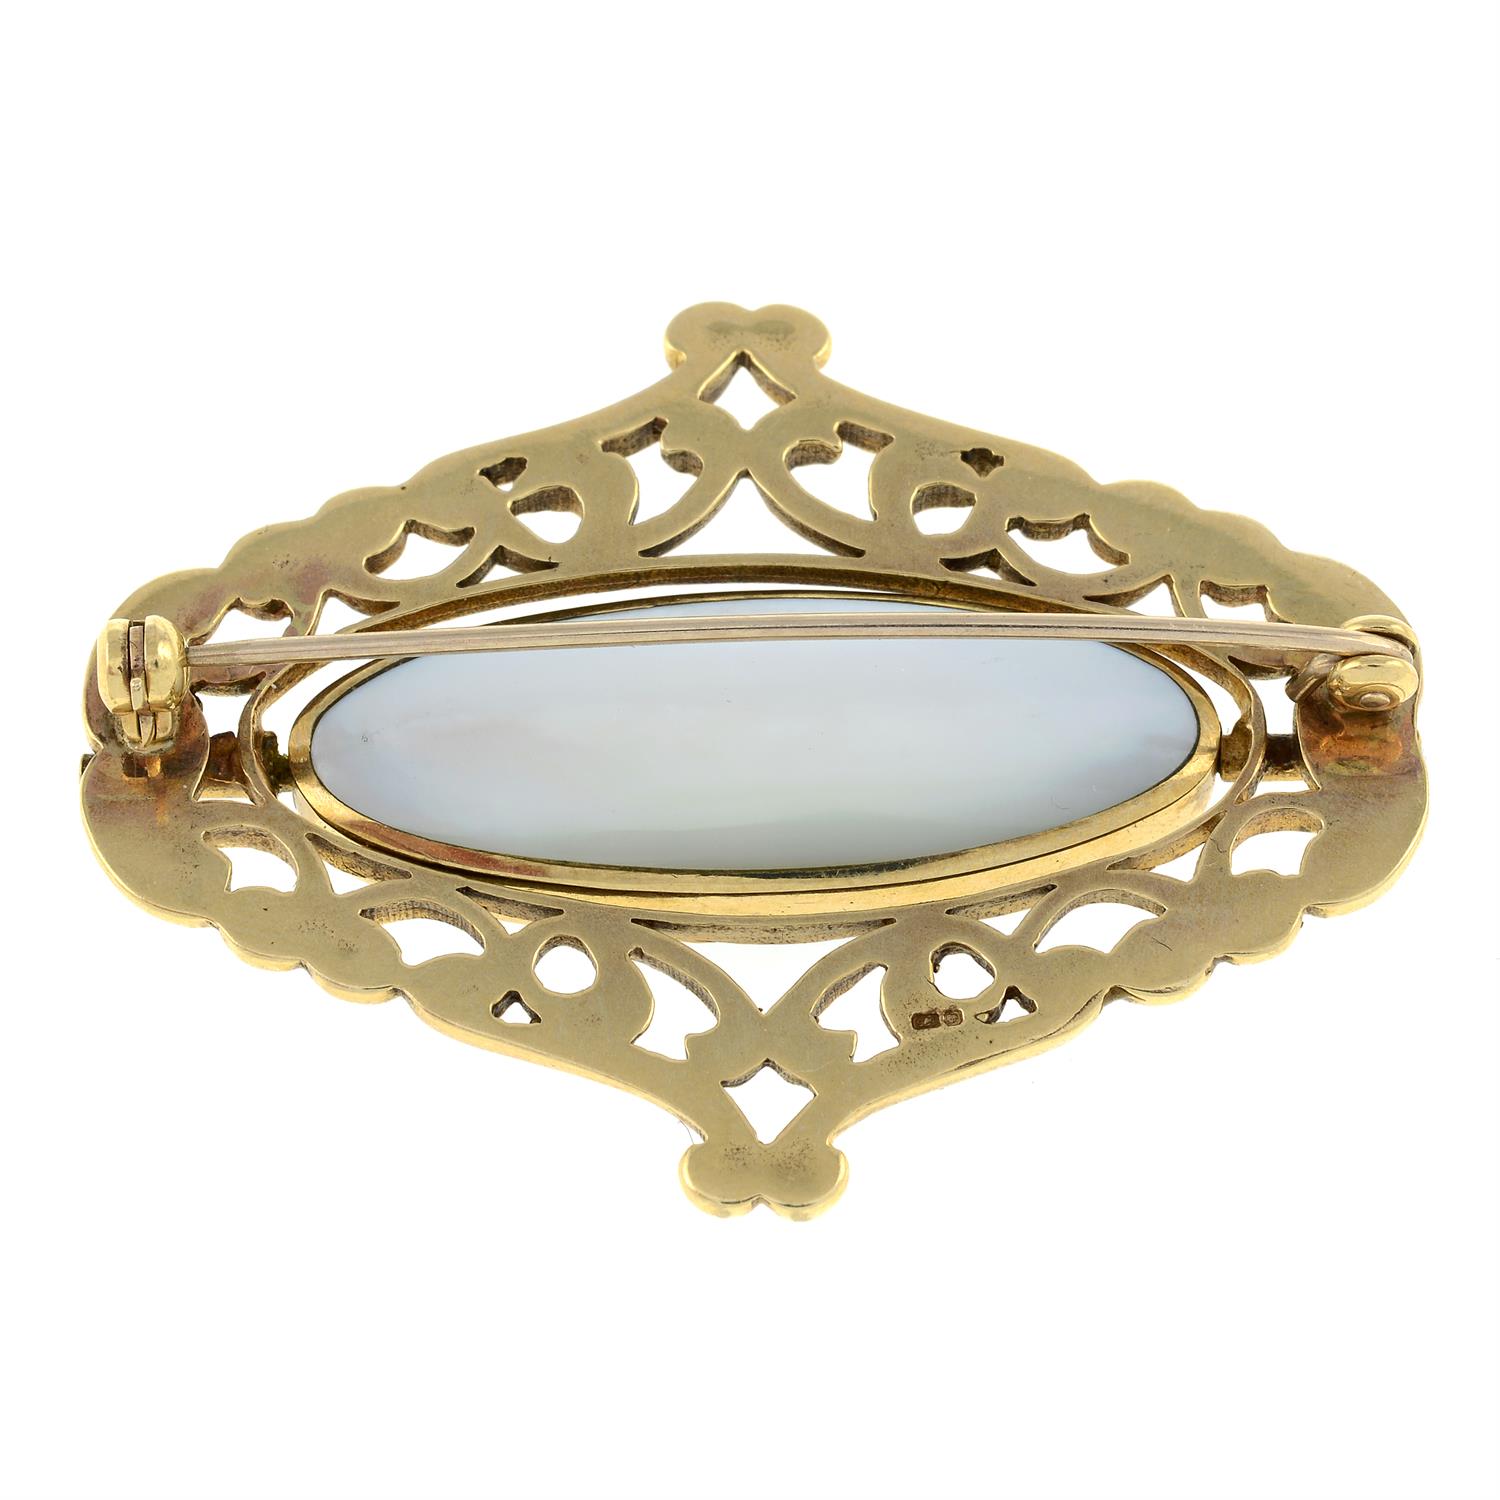 9ct gold brooch, with central gem-set swivel panel - Image 2 of 2